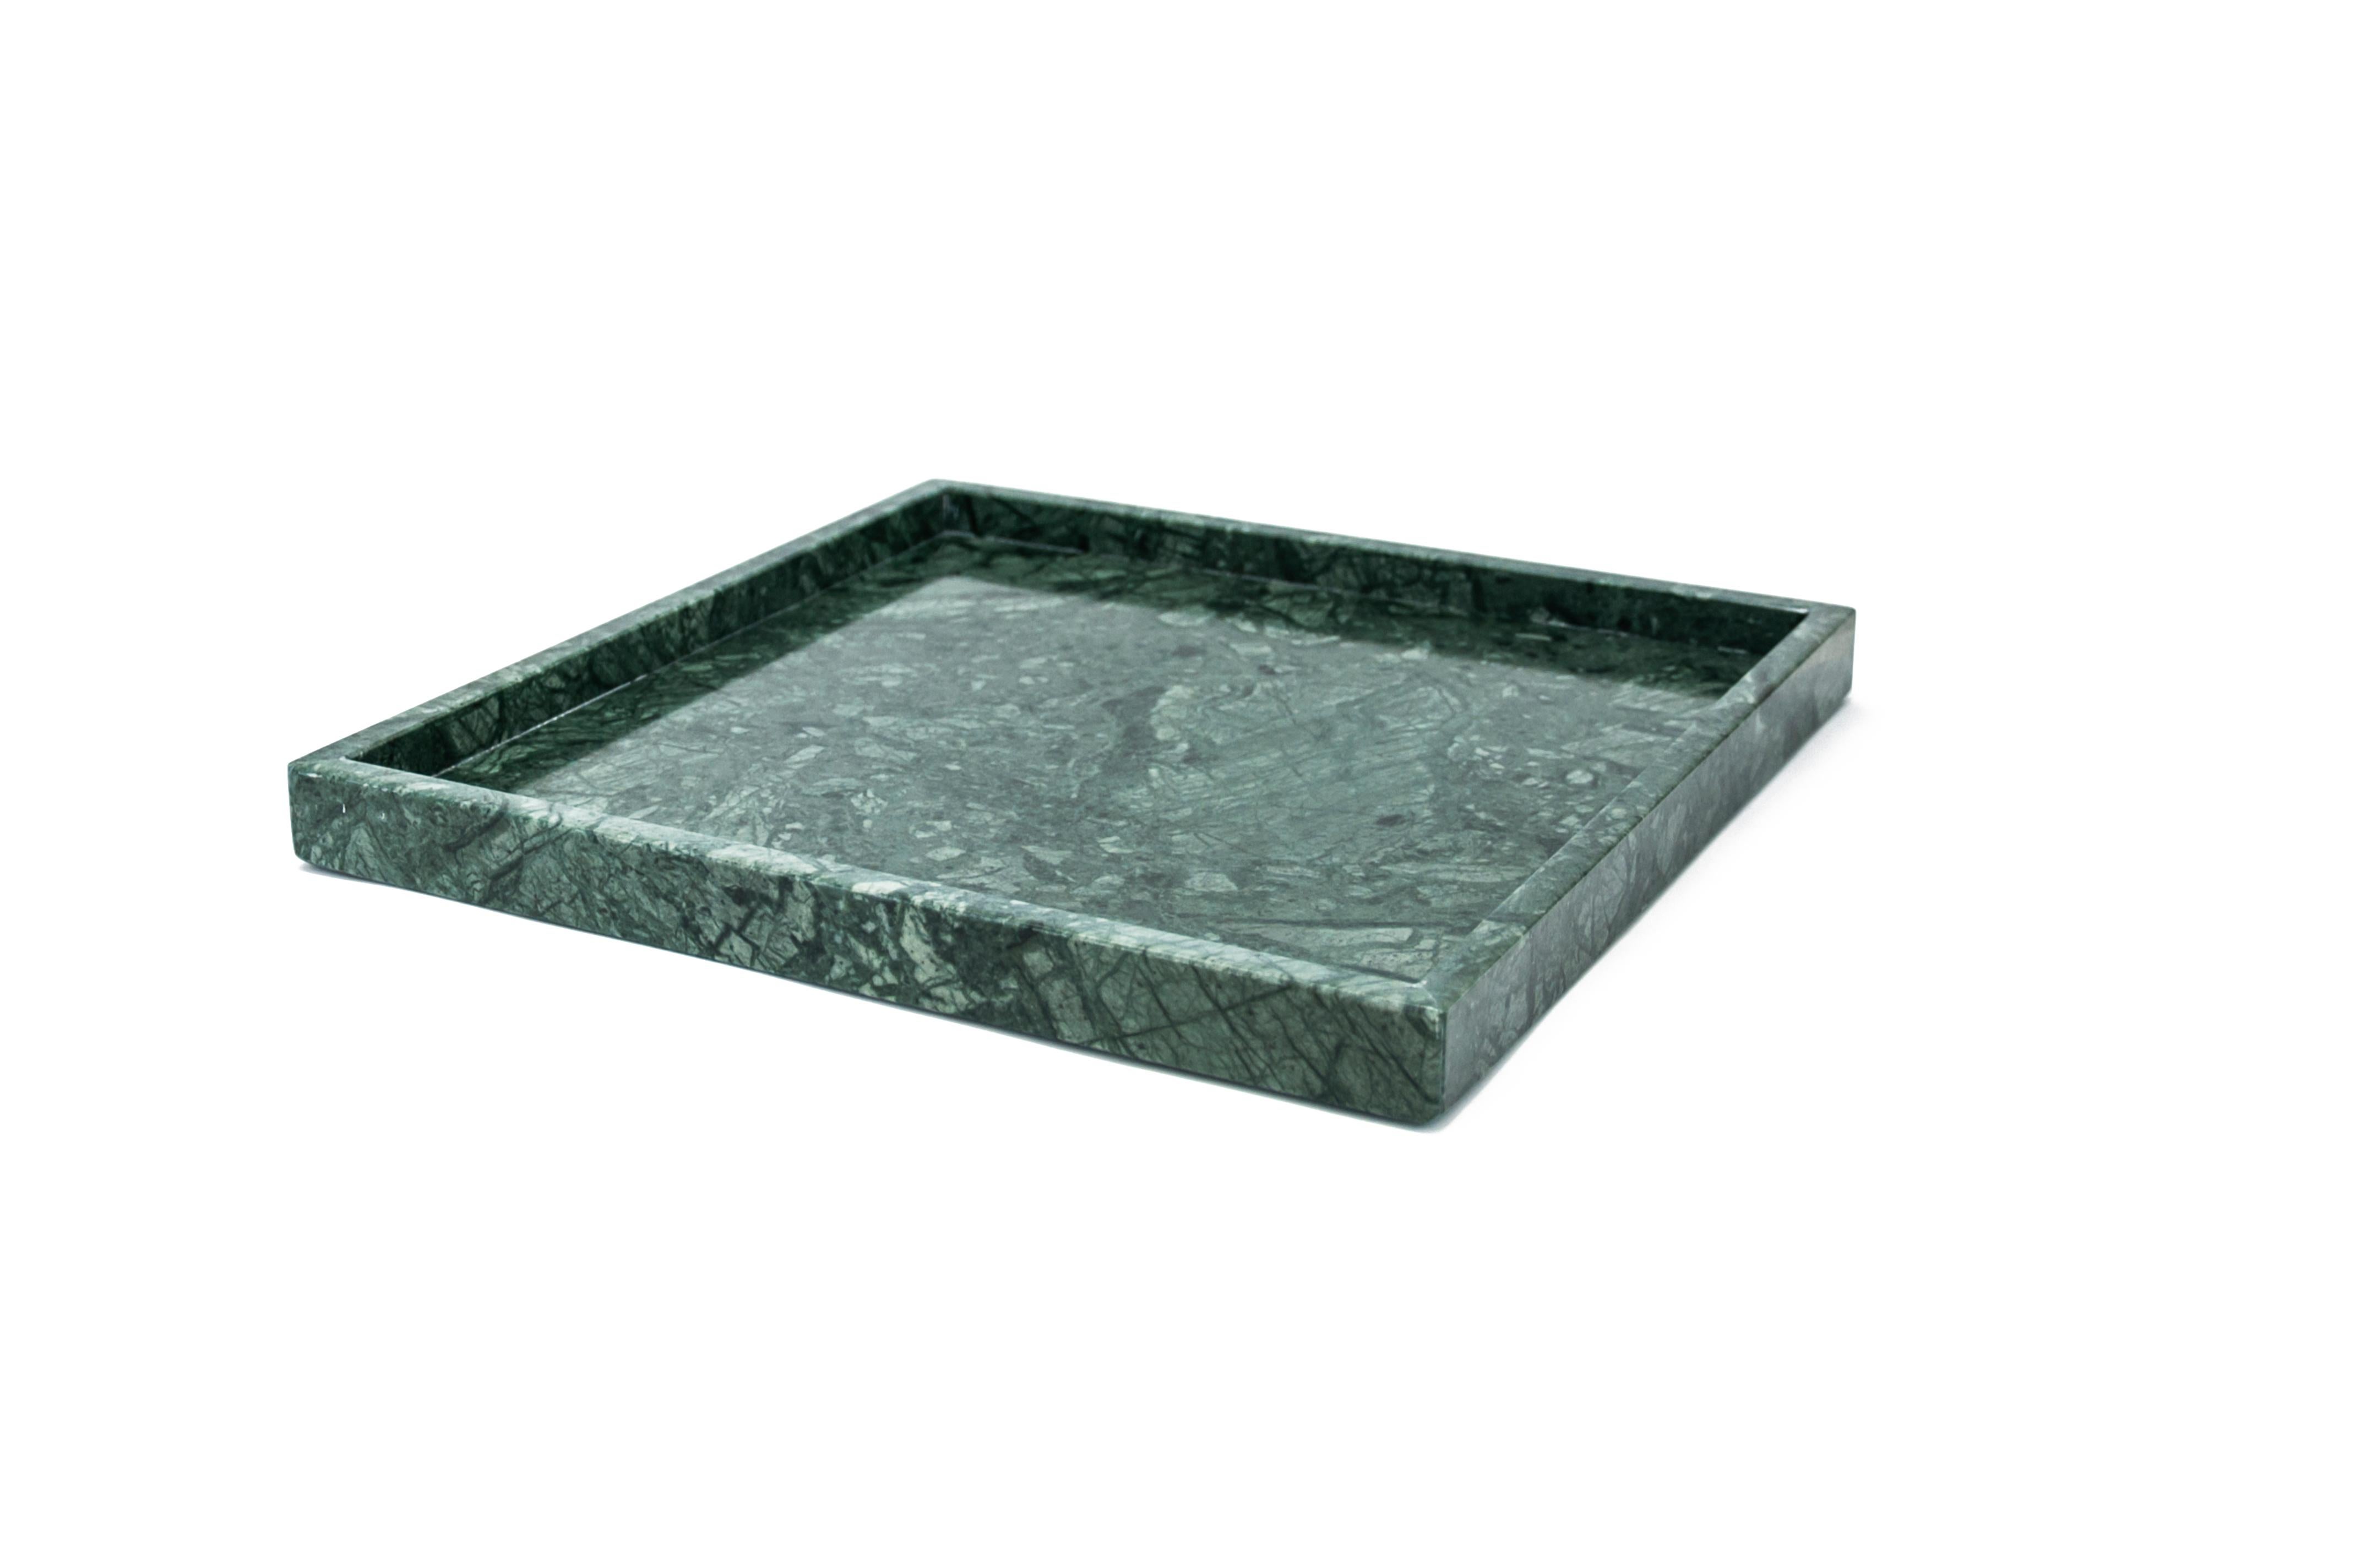 Hand-Crafted CUSTOMIZED Handmade Squared Green Guatemala Marble Tray